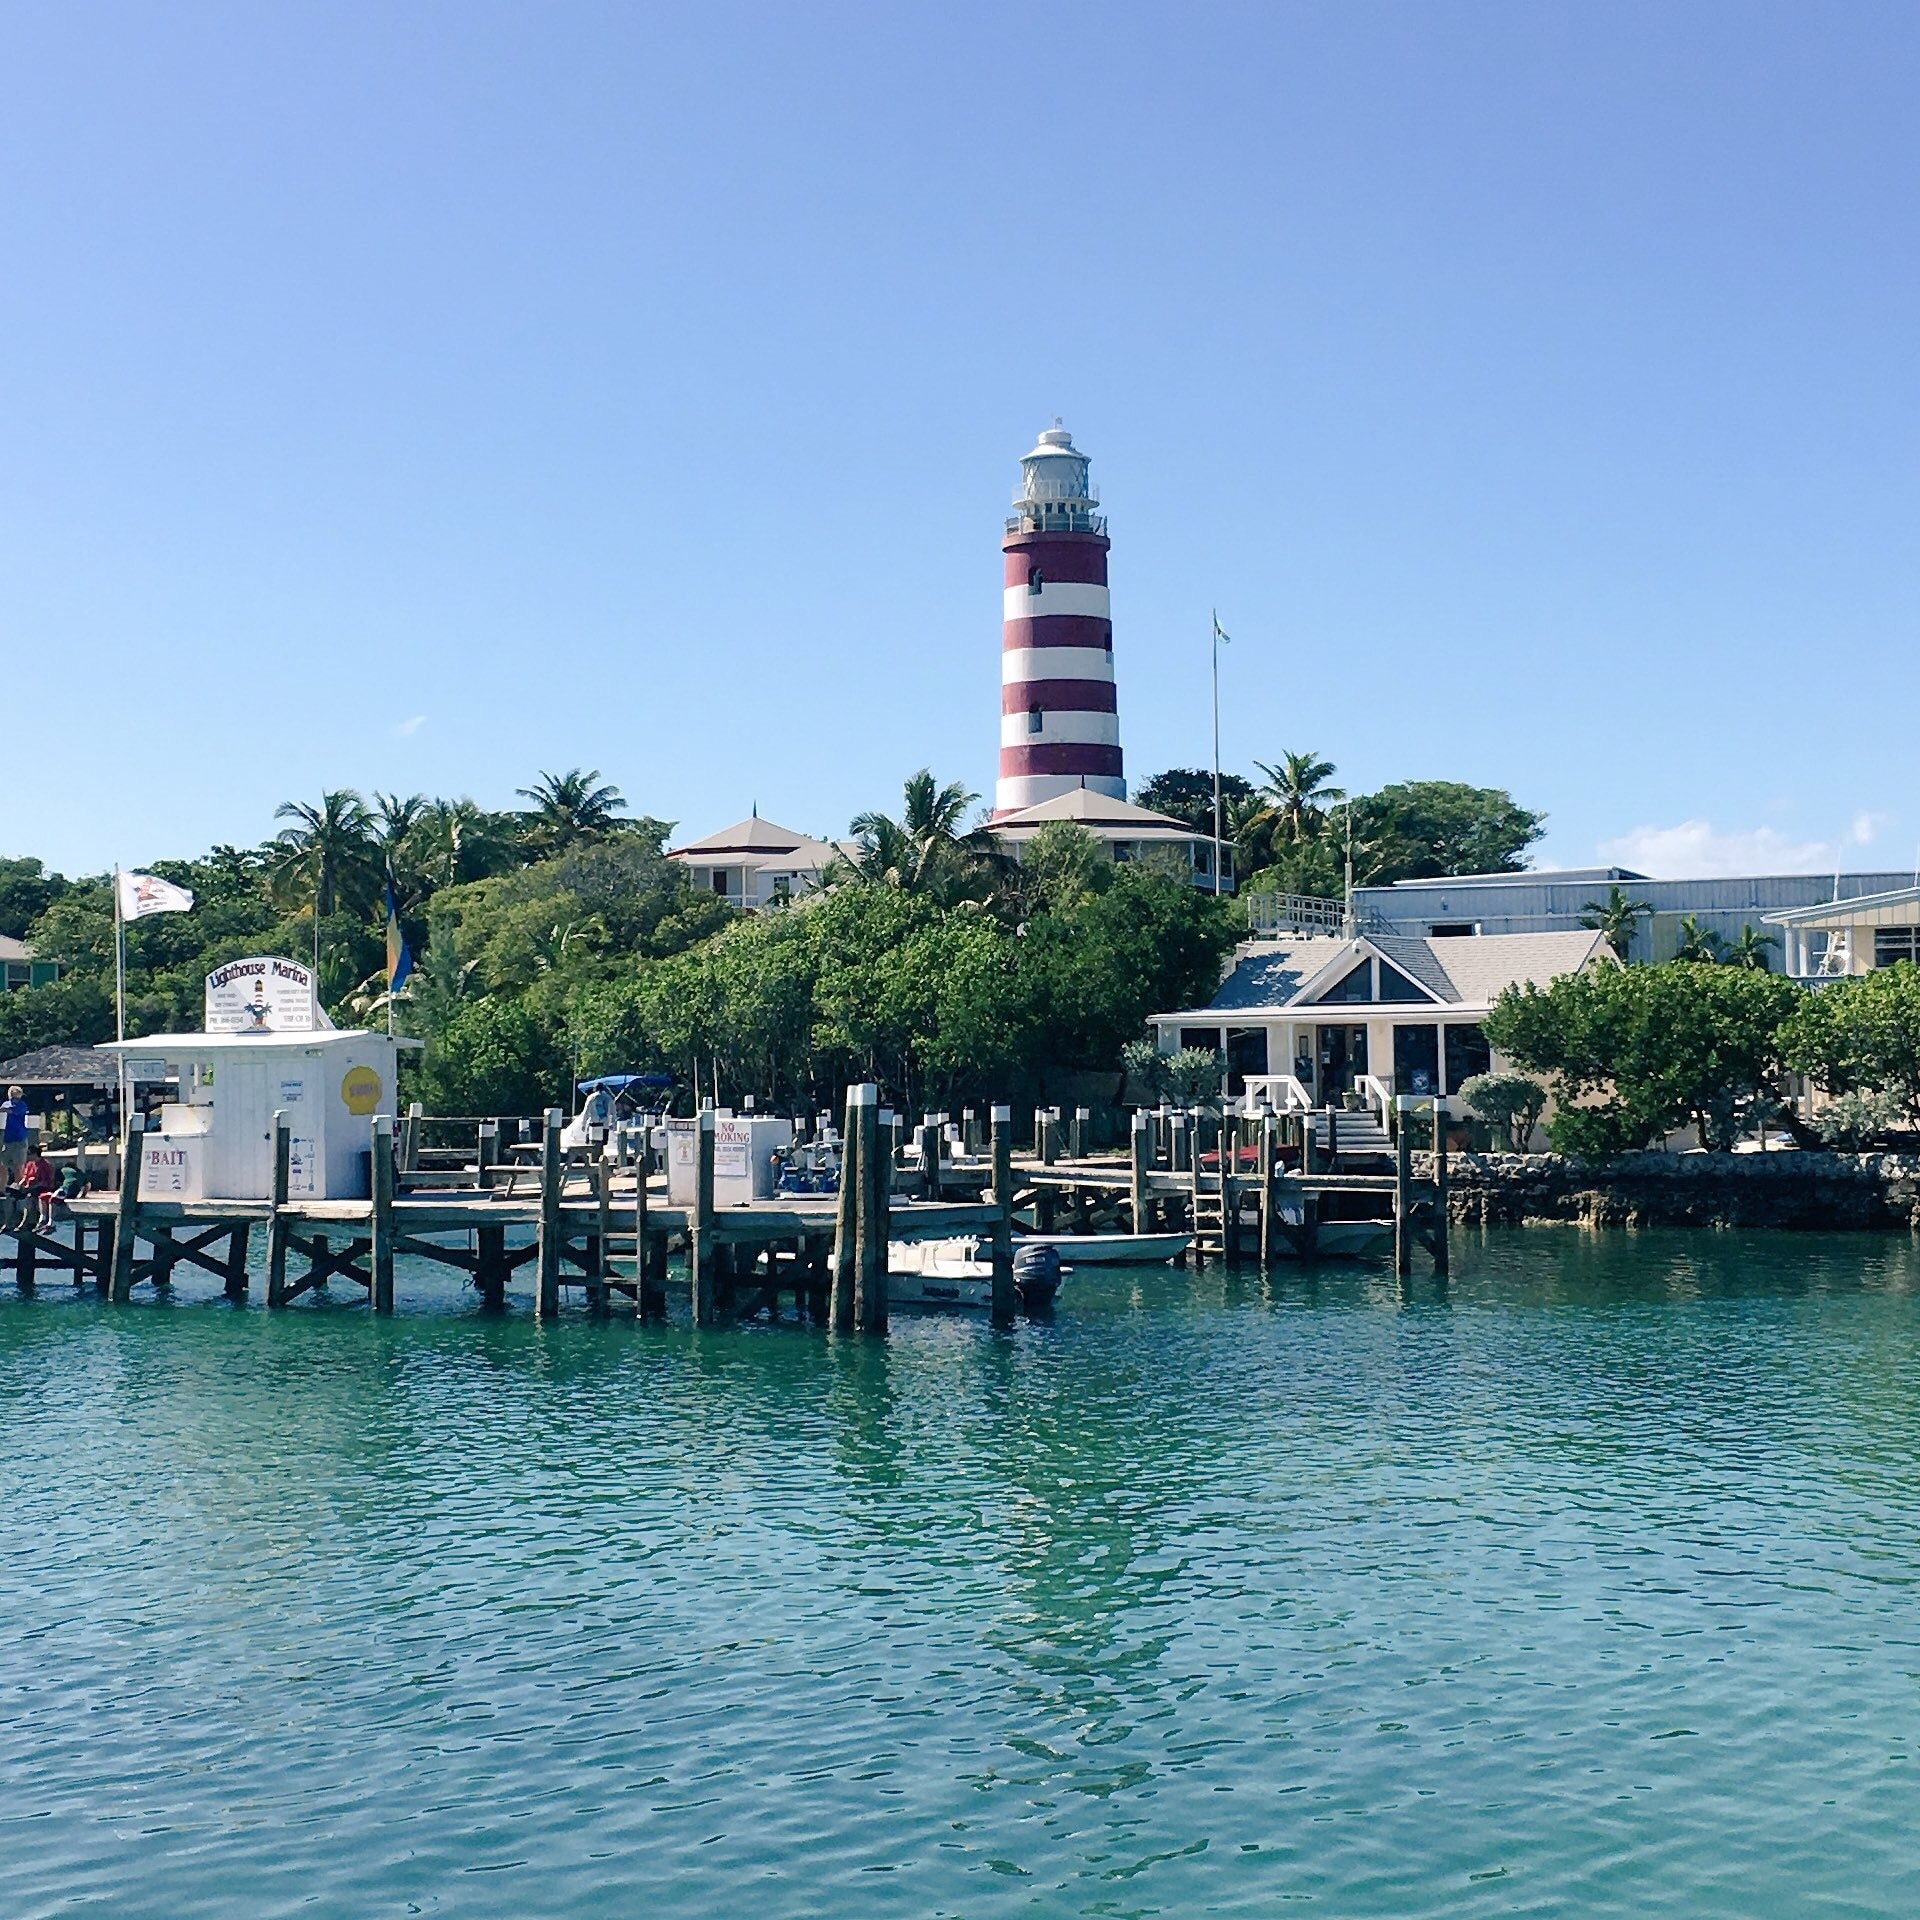 The candy cane lighthouse in #Hopetown, #Abaco, #Bahamas. #StunningStructures 